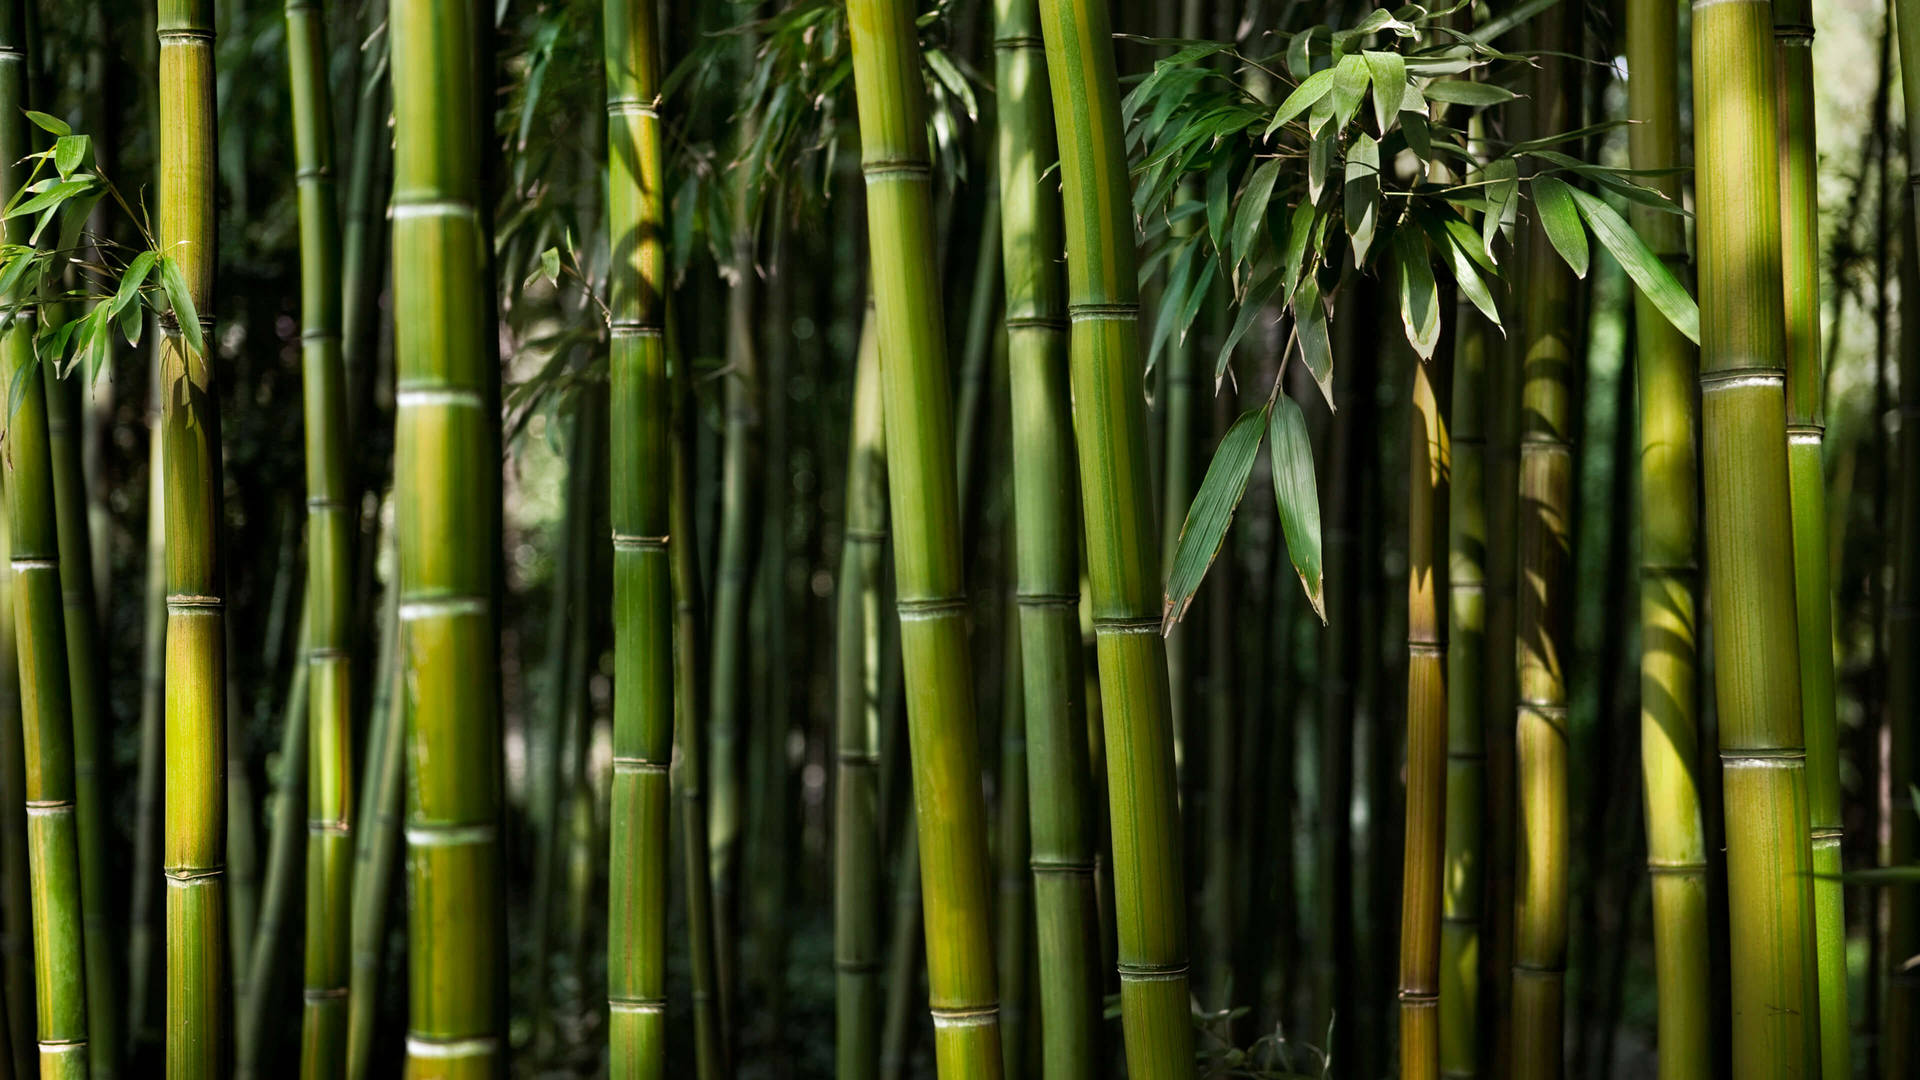 Green Bamboo 4k With Leaves